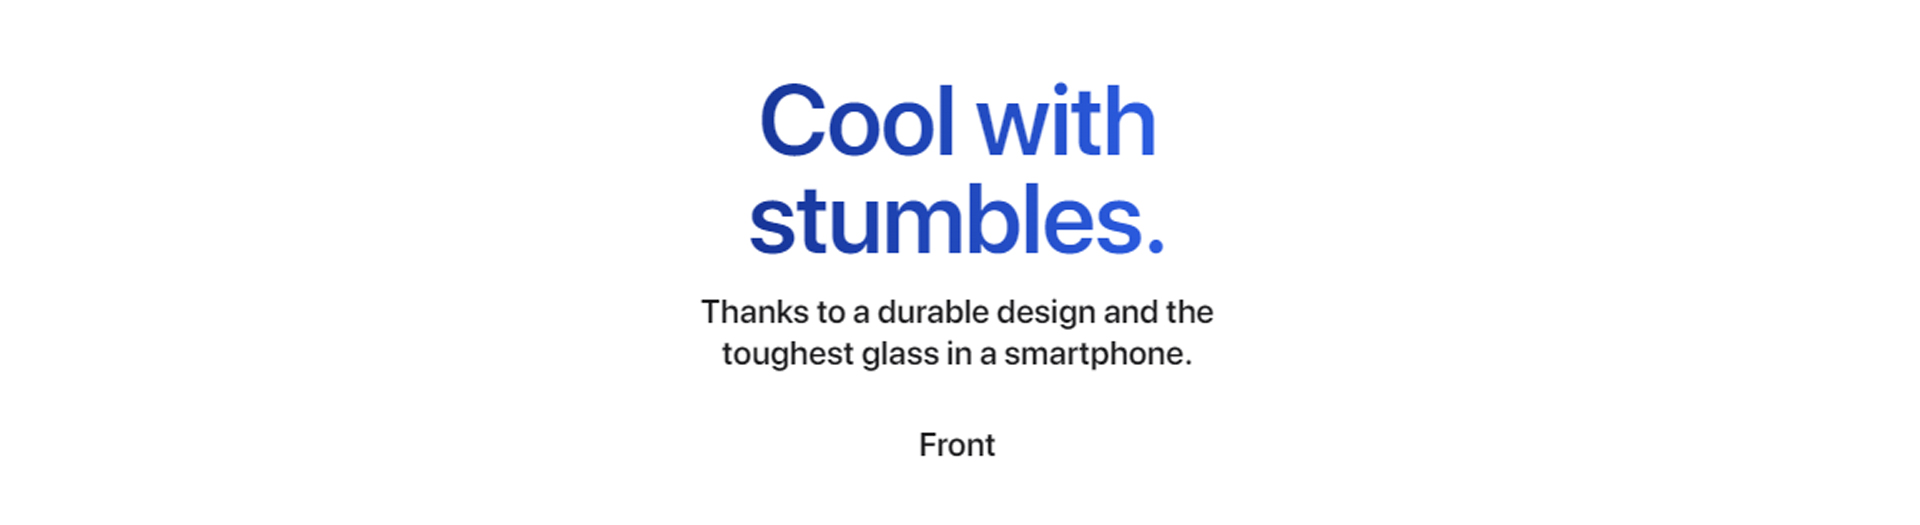 Cool With Stumbles